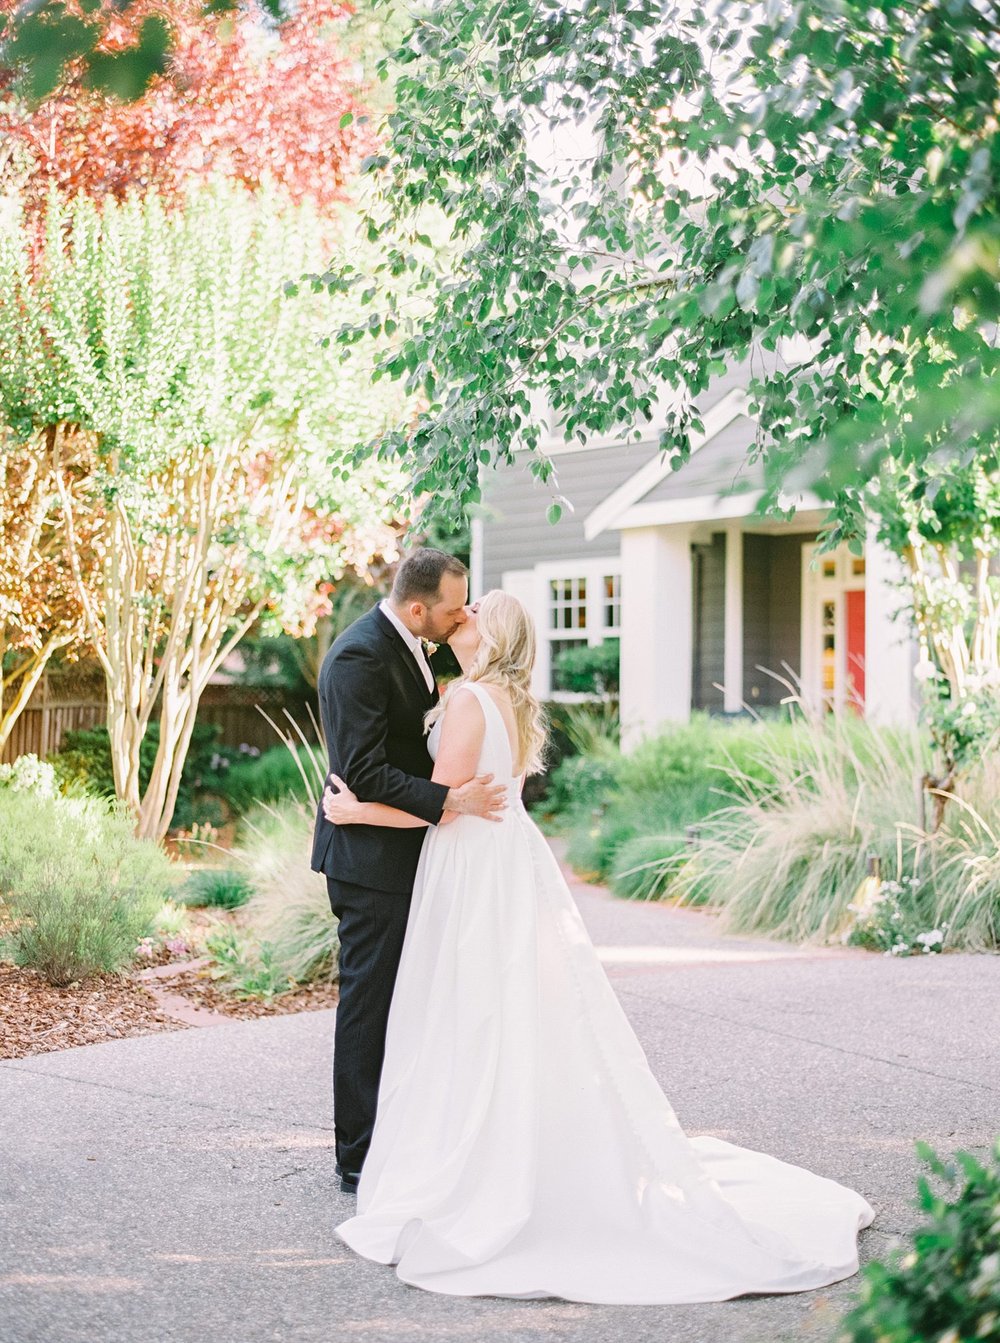 Couple kissing in front of house on their wedding day